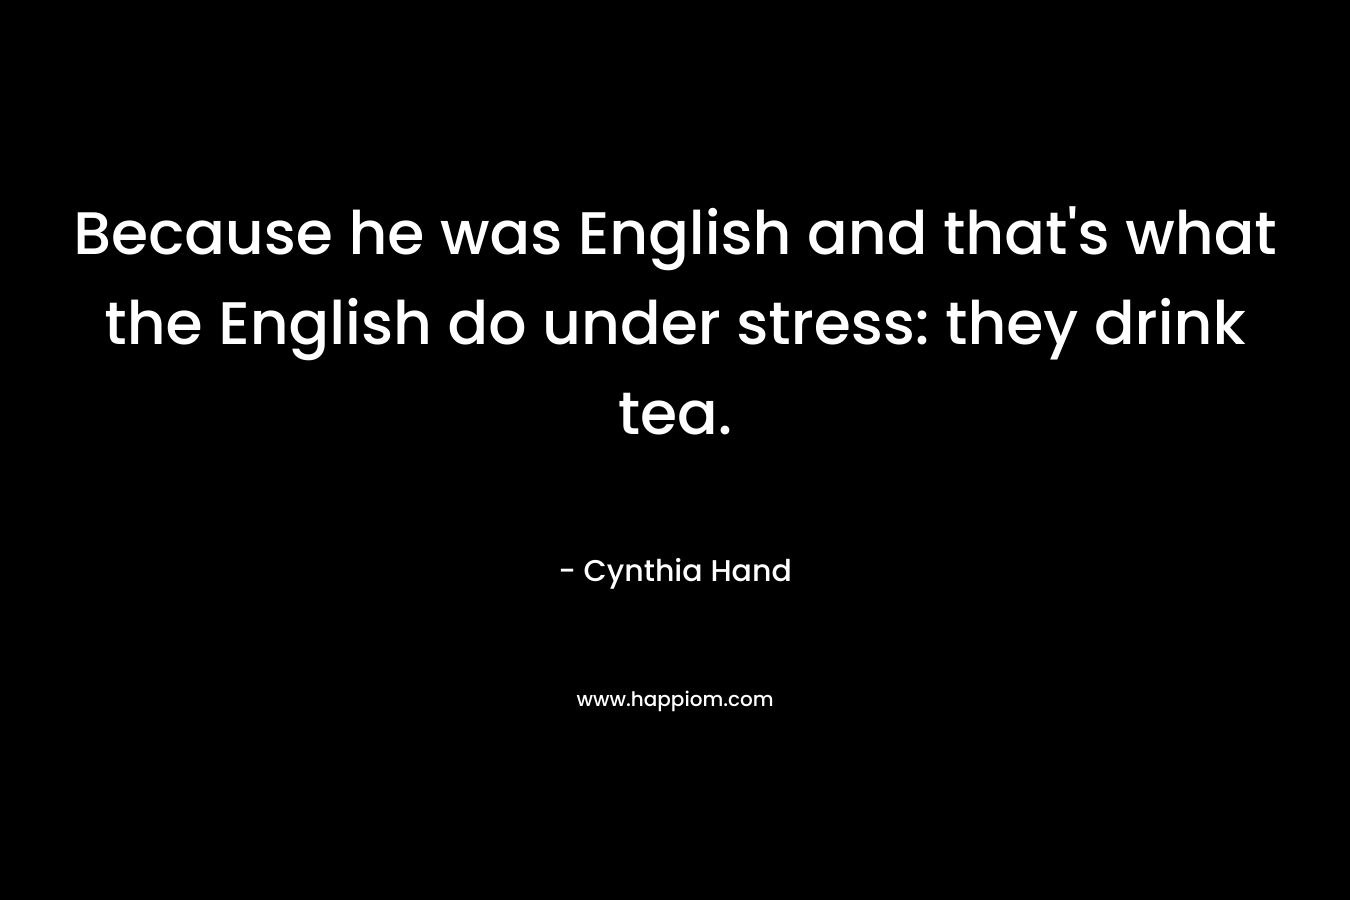 Because he was English and that’s what the English do under stress: they drink tea. – Cynthia Hand